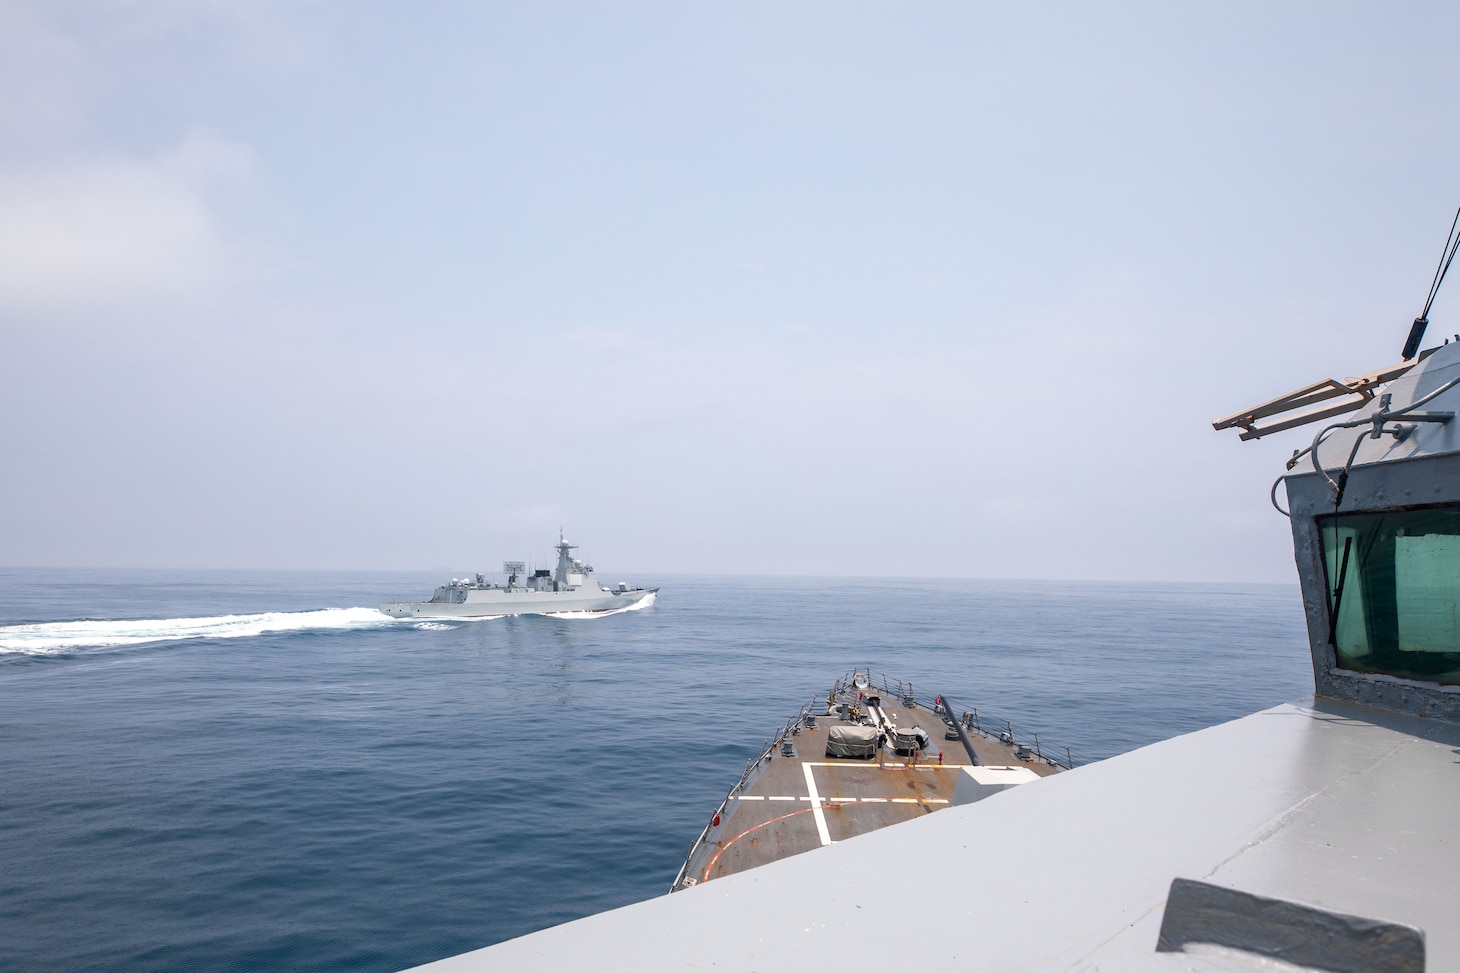 TAIWAN STRAIT (June 3, 2023) The Arleigh Burke-class guided-missile destroyer USS Chung-Hoon (DDG 93) observes PLA(N) LUYANG III DDG 132 (PRC LY 132) execute maneuvers in an unsafe manner while conducting a routine south to north Taiwan Strait transit alongside the Halifax-class frigate HMCS Montreal (FFG 336), June 3. USS Chung-Hoon is on a routine deployment to U.S. 7th Fleet and is assigned to Commander, Task Force (CTF 71)/ Destroyer Squadron (DESRON) 15. CTF 71/DESRON 15 is the largest forward-deployed DESRON and the U.S. 7th Fleet’s principal surface force. (U.S. Navy photo by Mass Communication Specialist 1st Class Andre T. Richard)